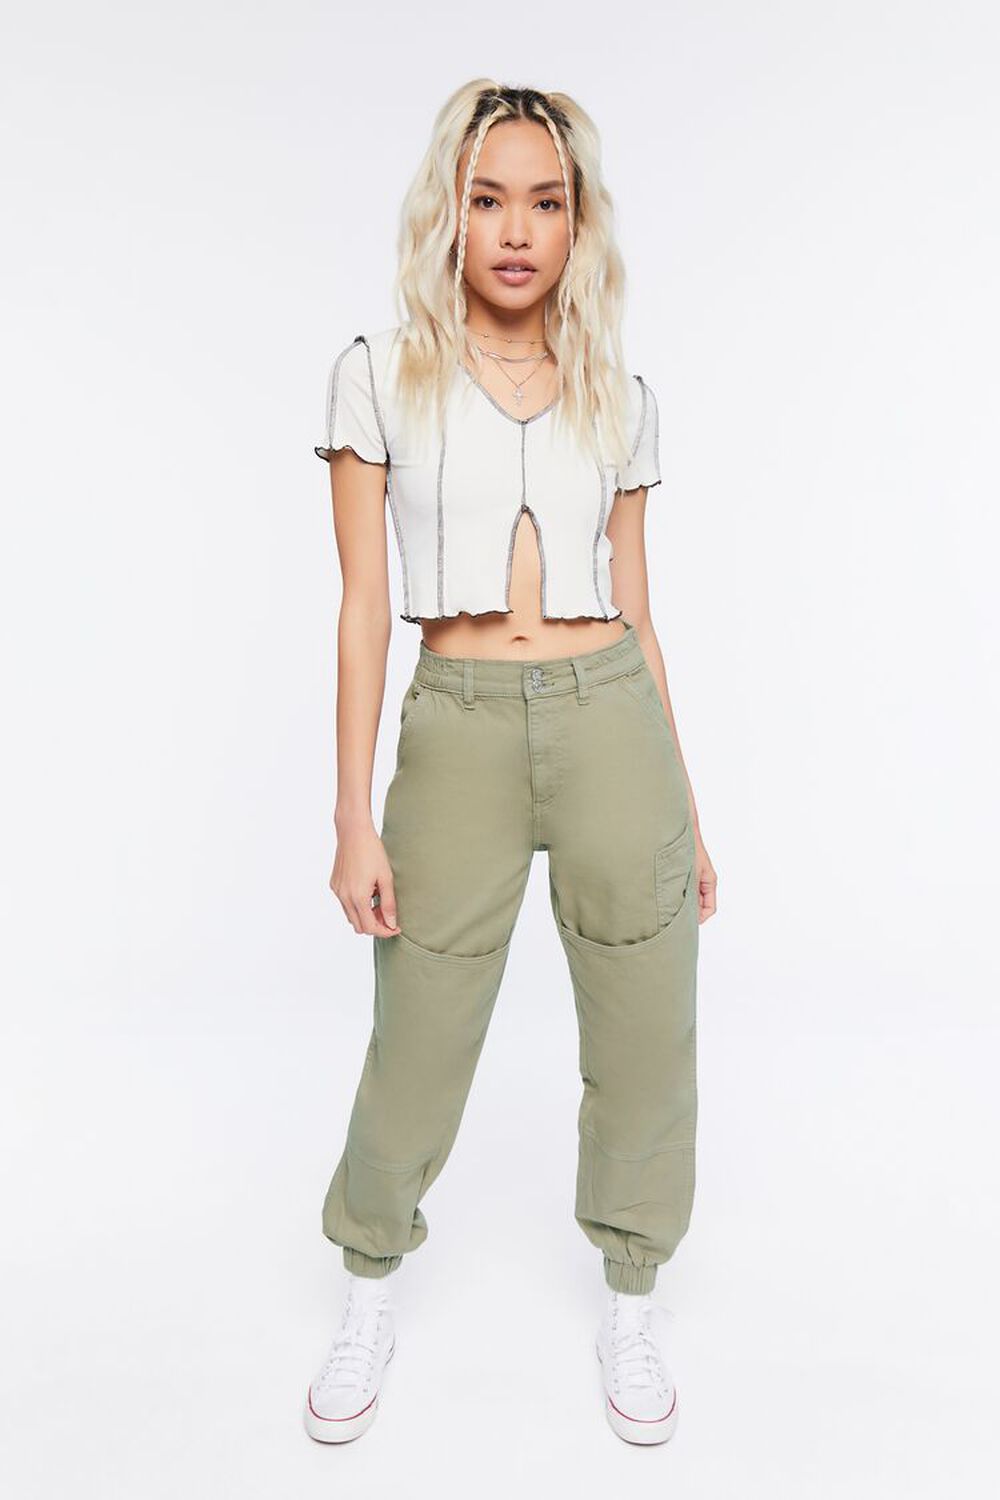 OLIVE Pocket High-Rise Twill Joggers, image 1